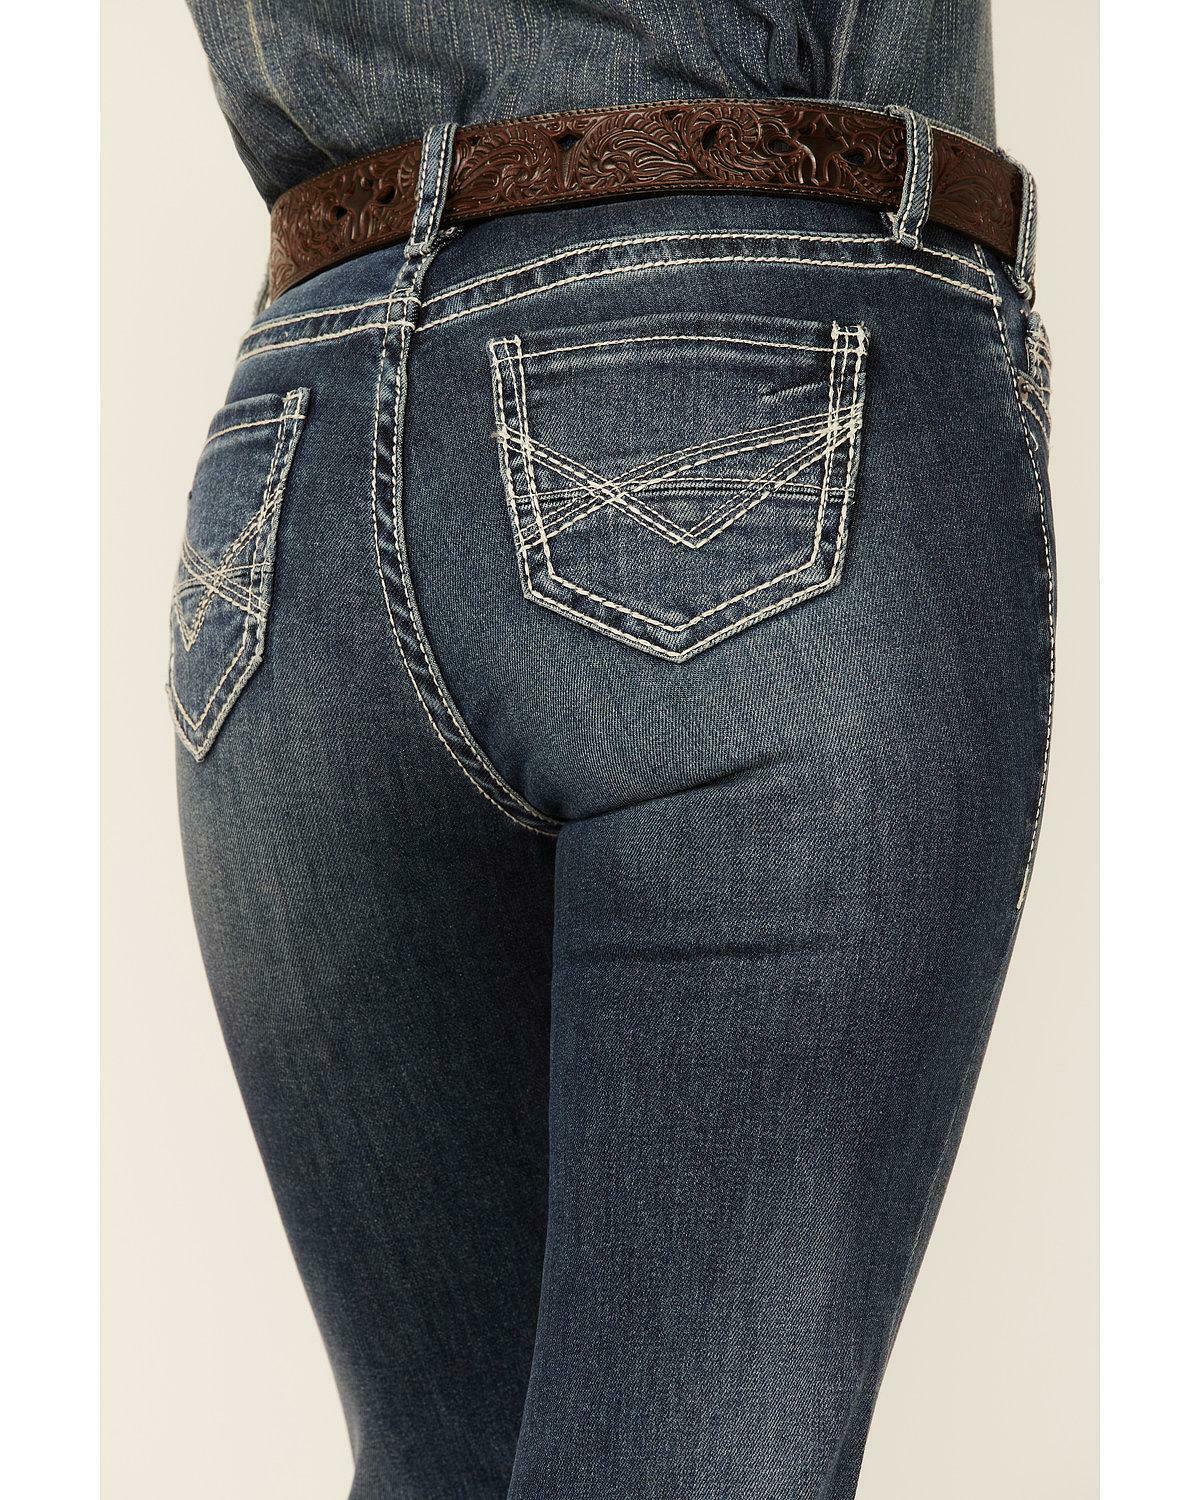 Rock and Roll Women's Riding Bootcut Denim Jeans - W7-2711